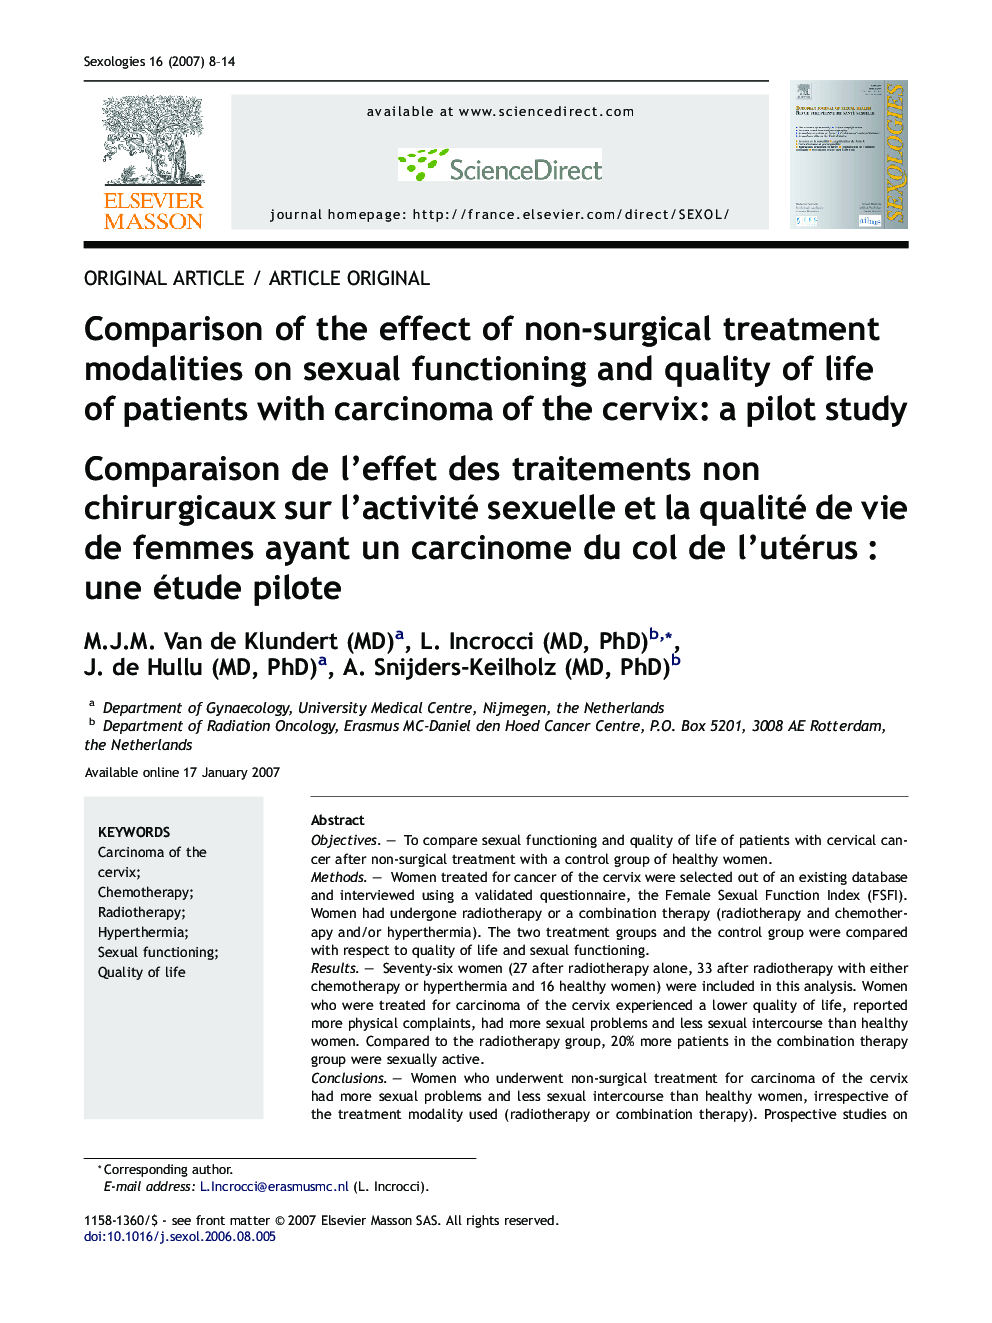 Comparison of the effect of non-surgical treatment modalities on sexual functioning and quality of life of patients with carcinoma of the cervix: a pilot study